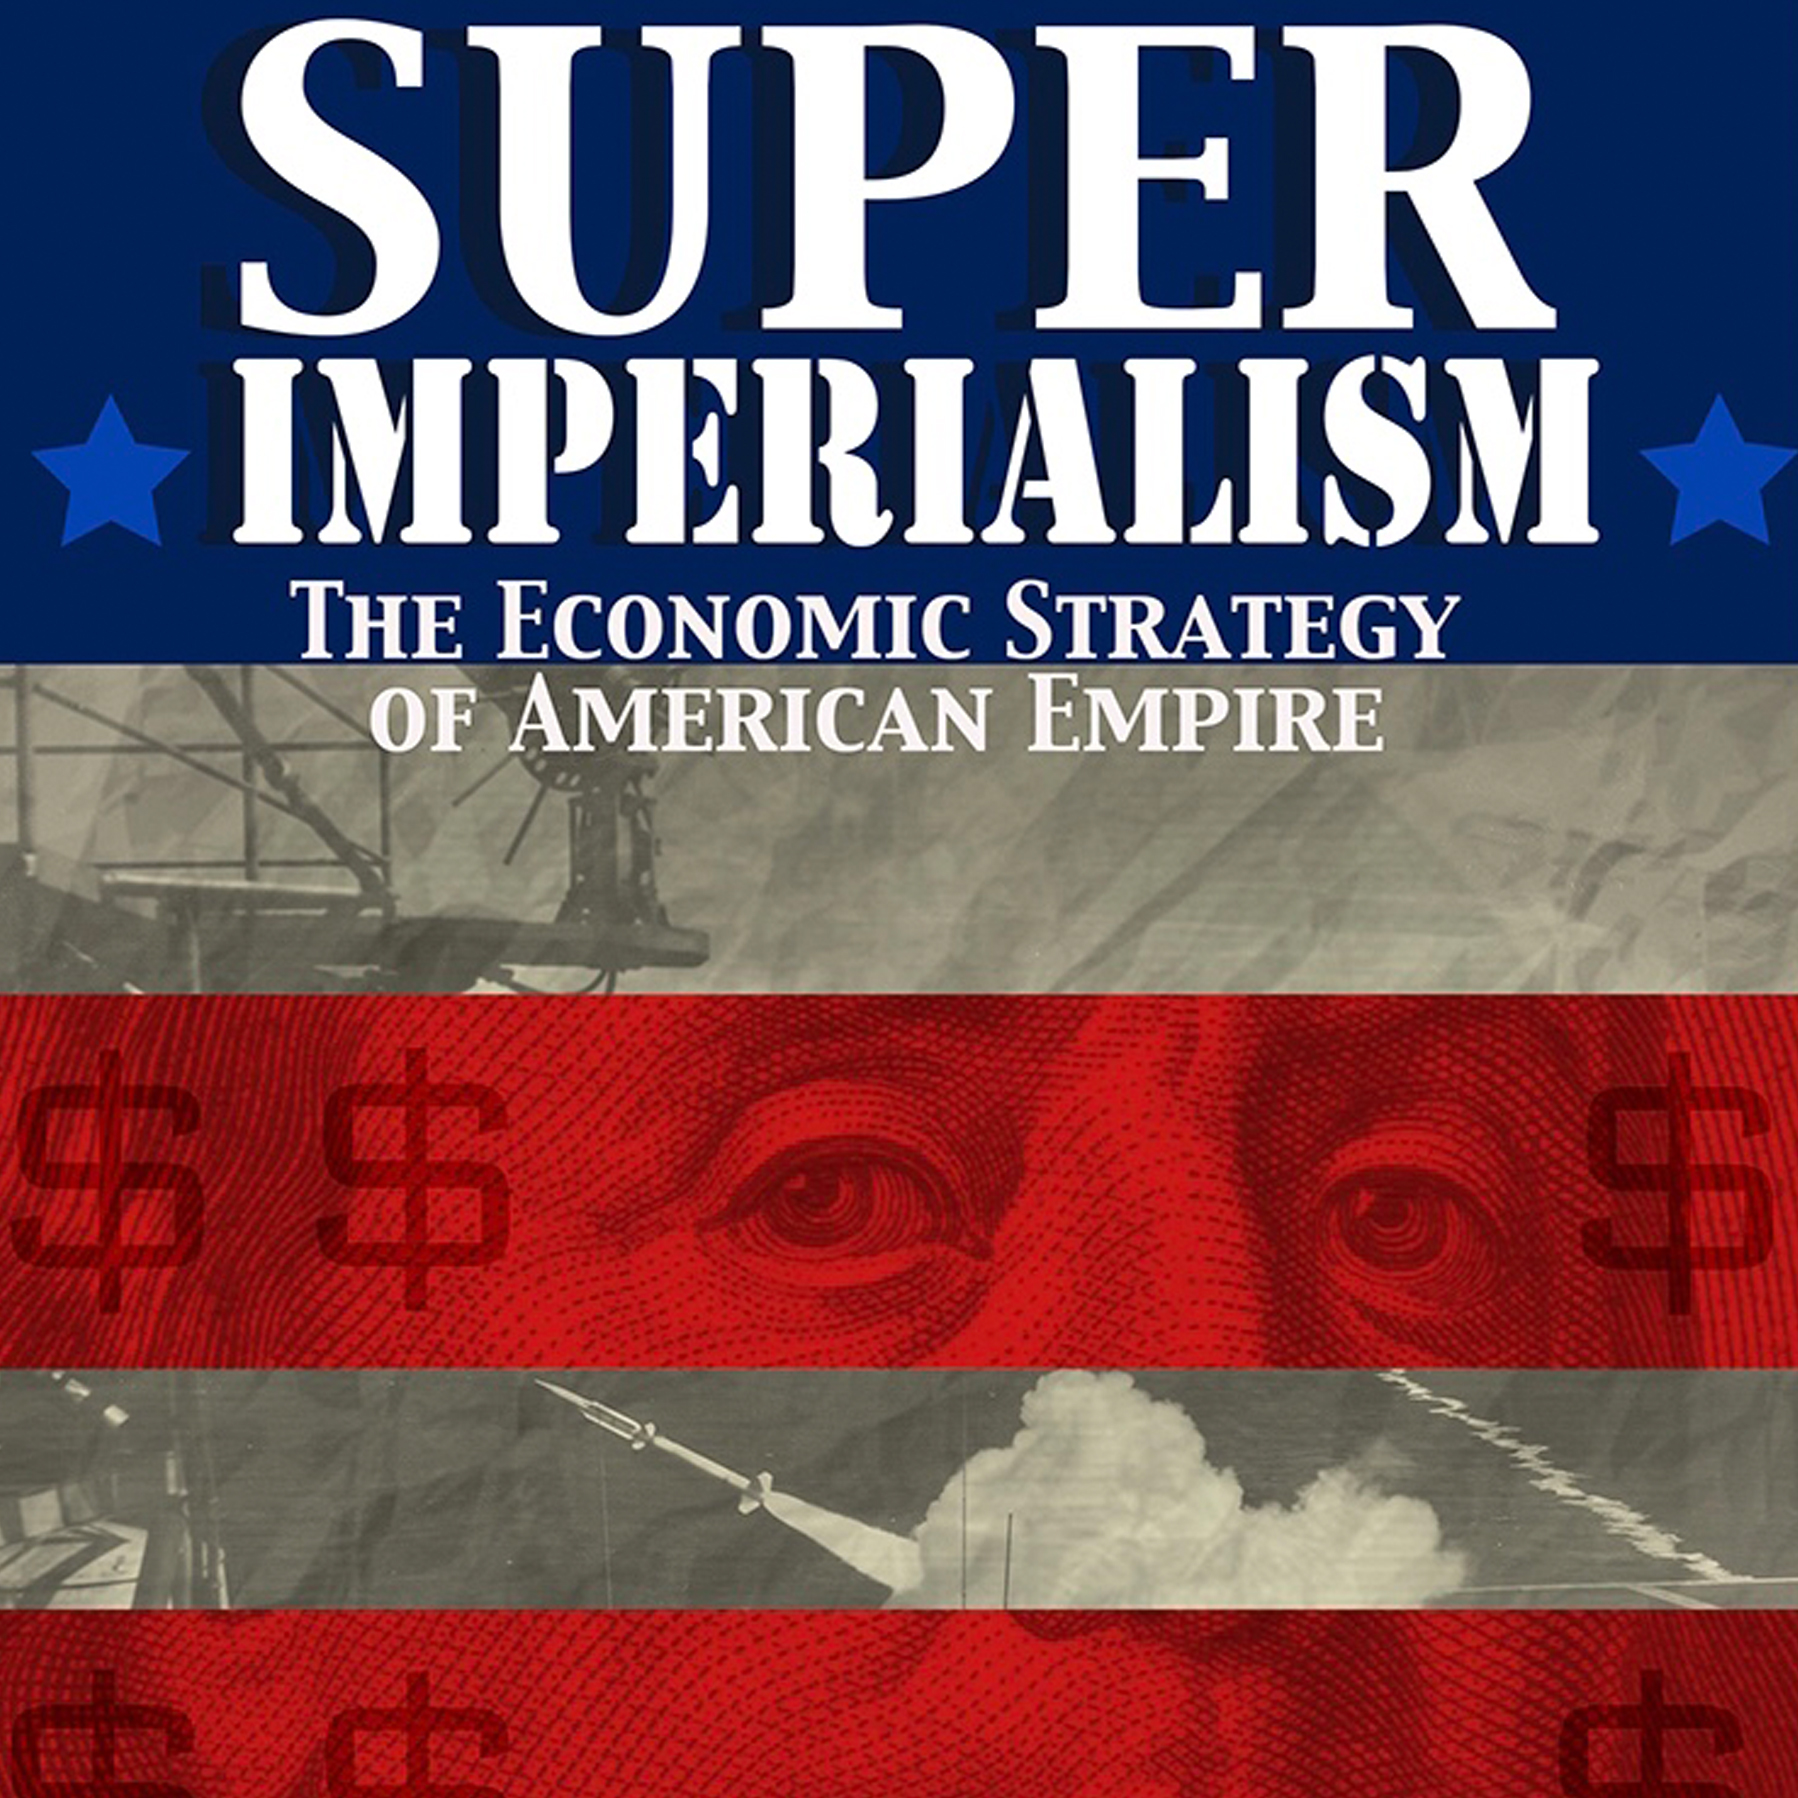 Super Imperialism cover by Miguel Guerra